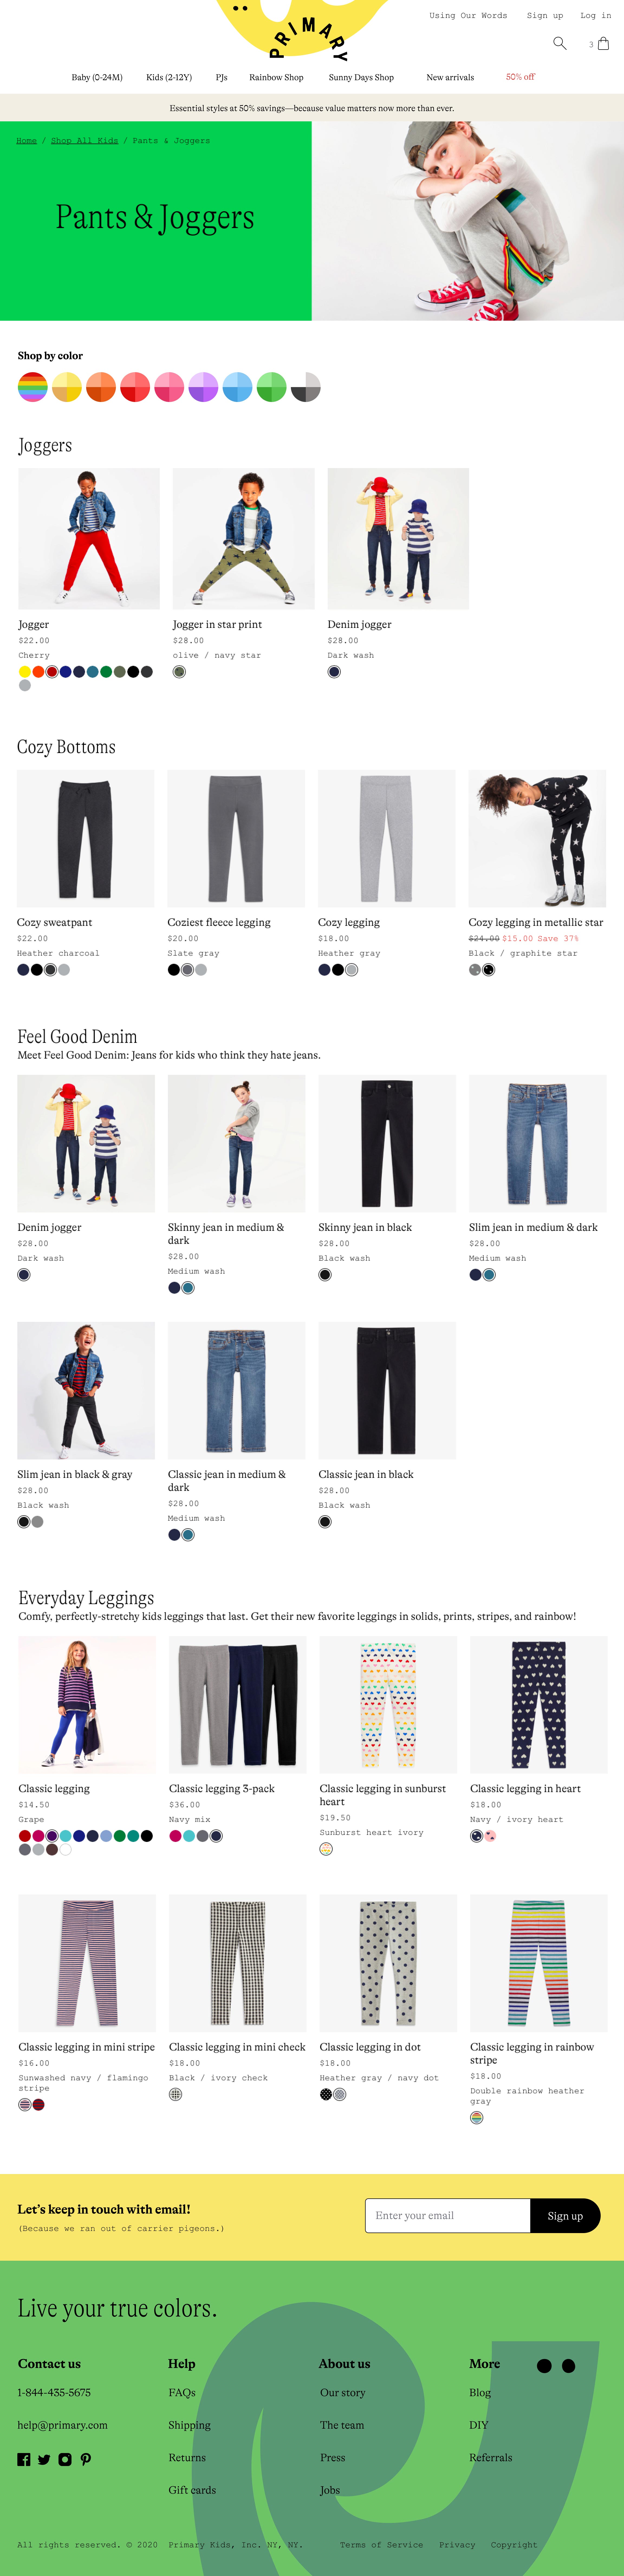 Screenshot of the entire desktop product list page for kids pants and joggers.